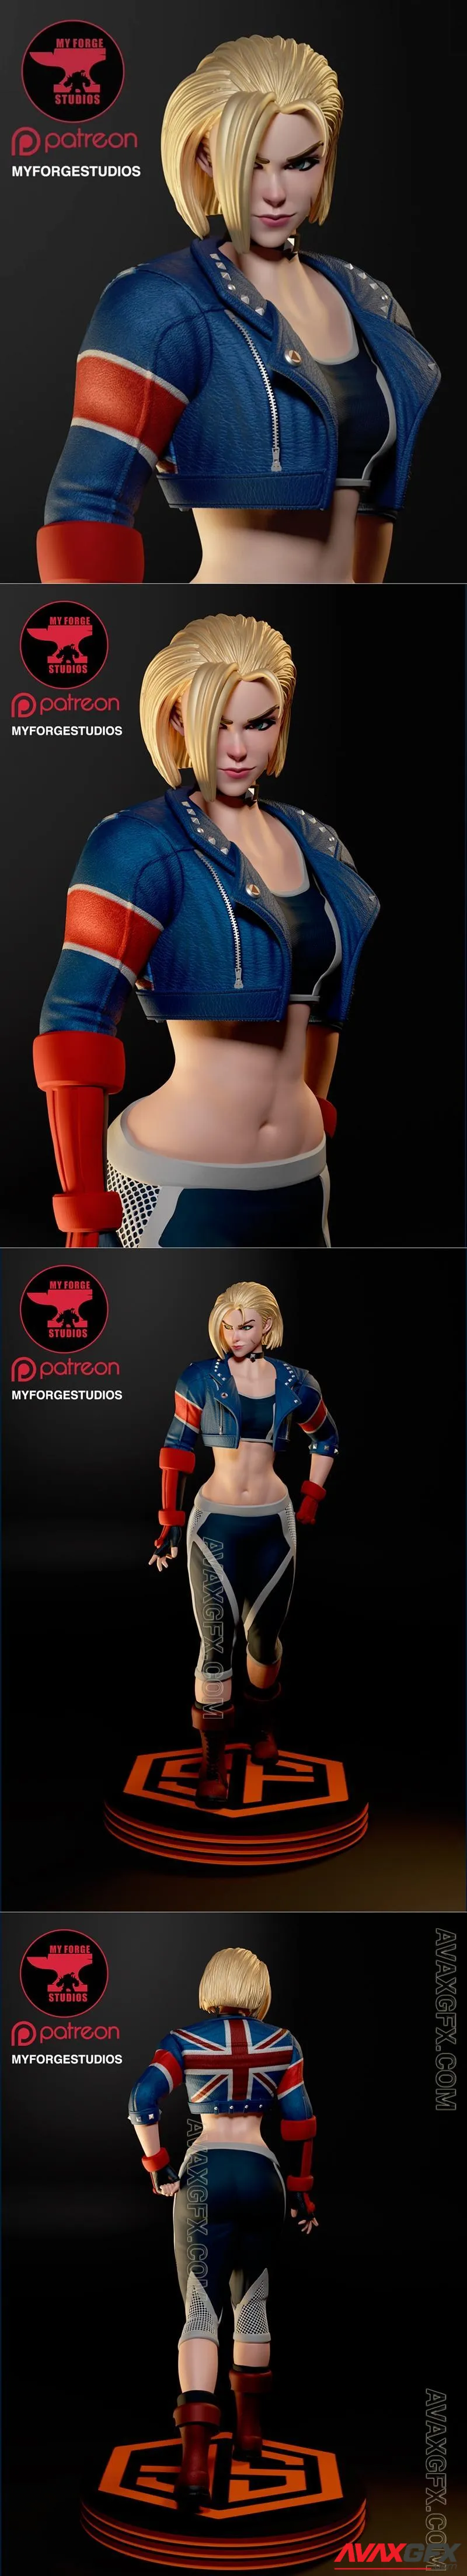 My Forge Studios - Cammy from SF6 - STL 3D Model